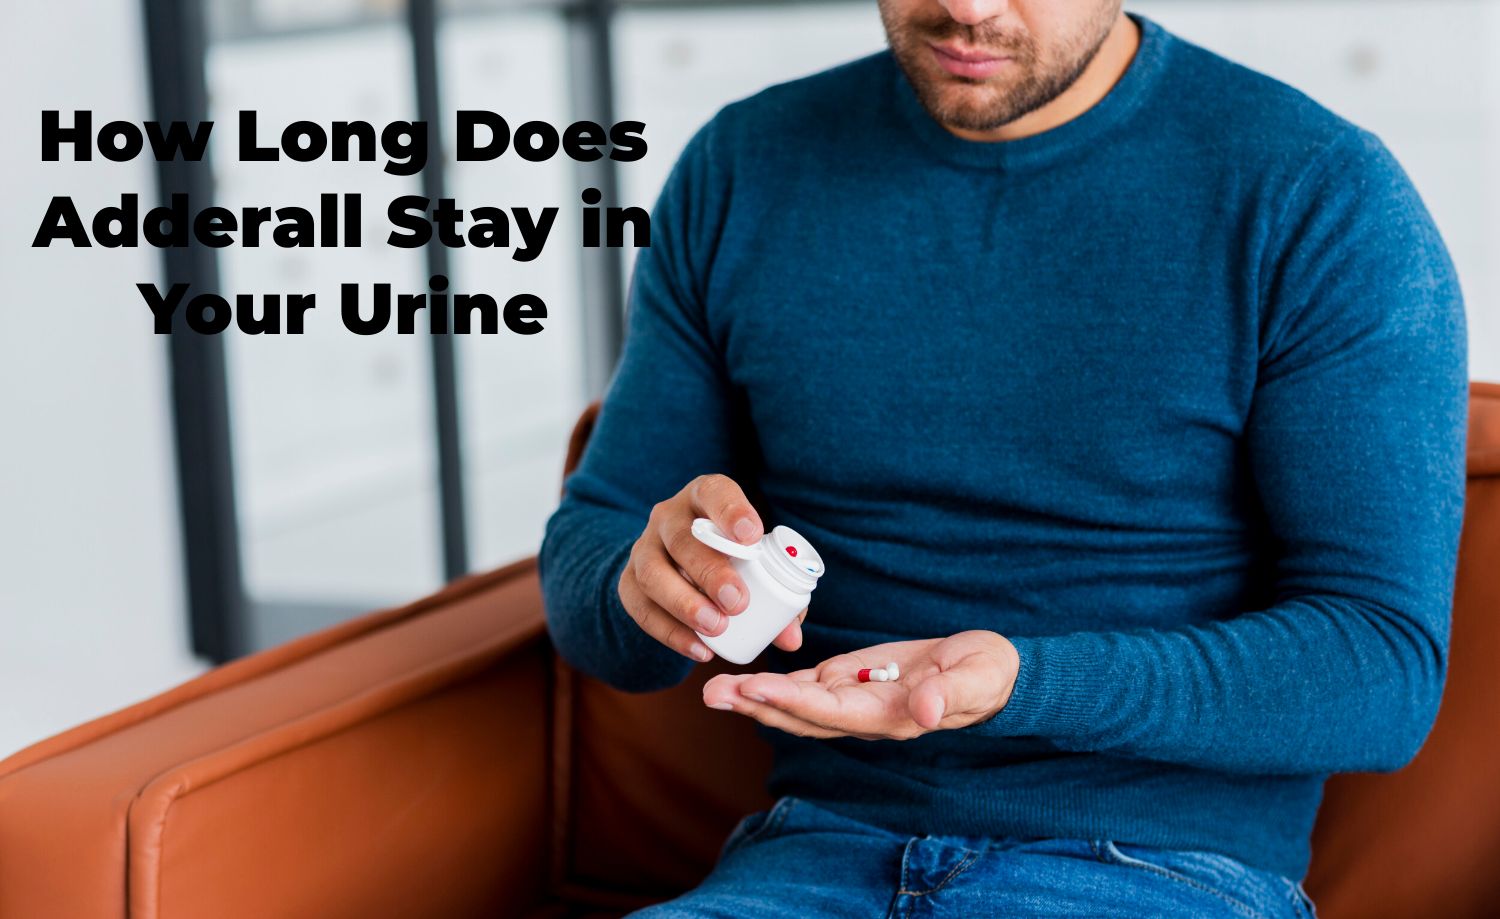 How Long Does Adderall Stay in Your Urine